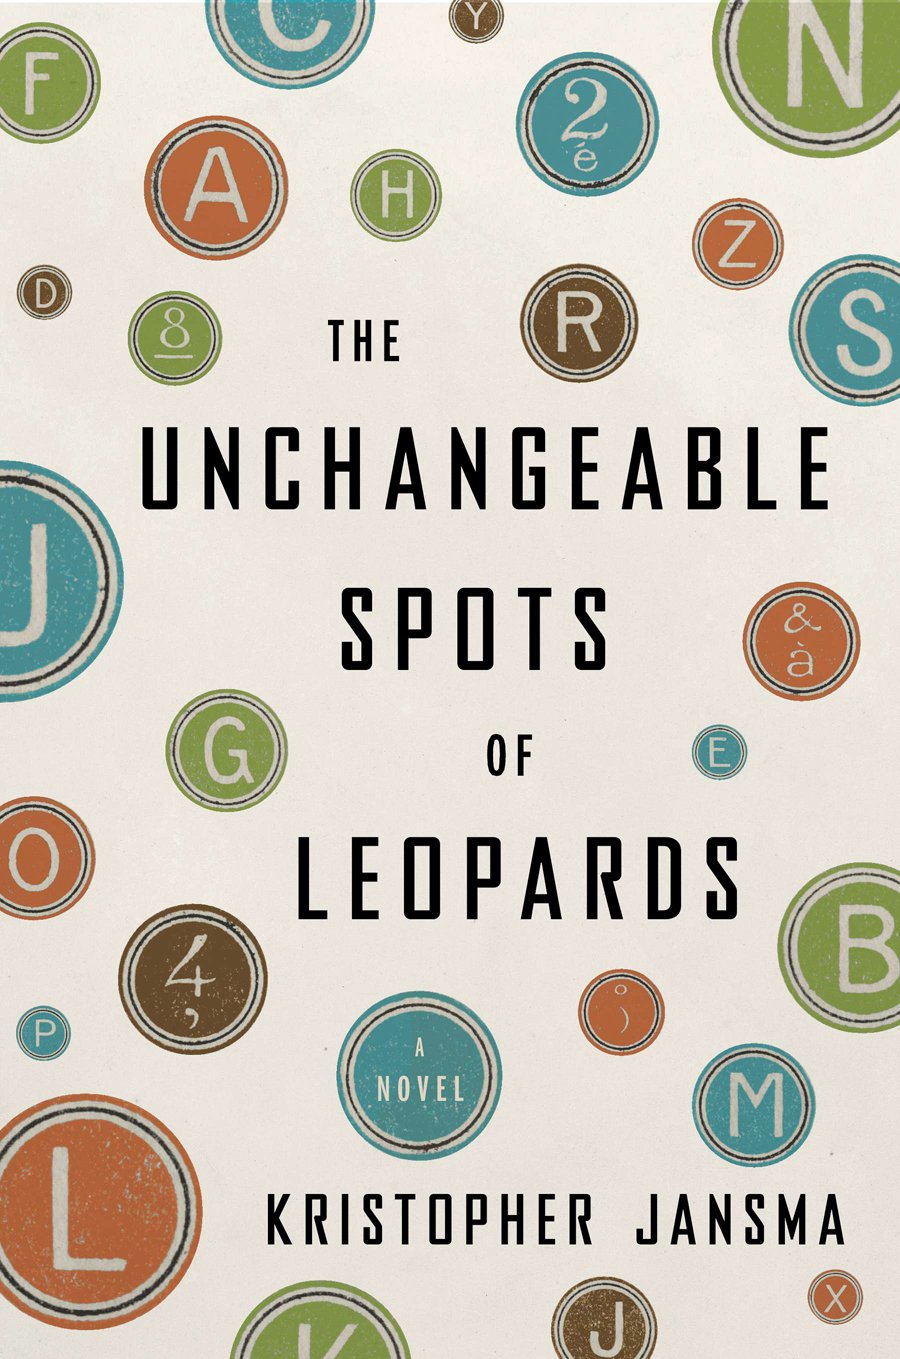 The Unchangeable Spots Of Leopards book cover April 13 p180